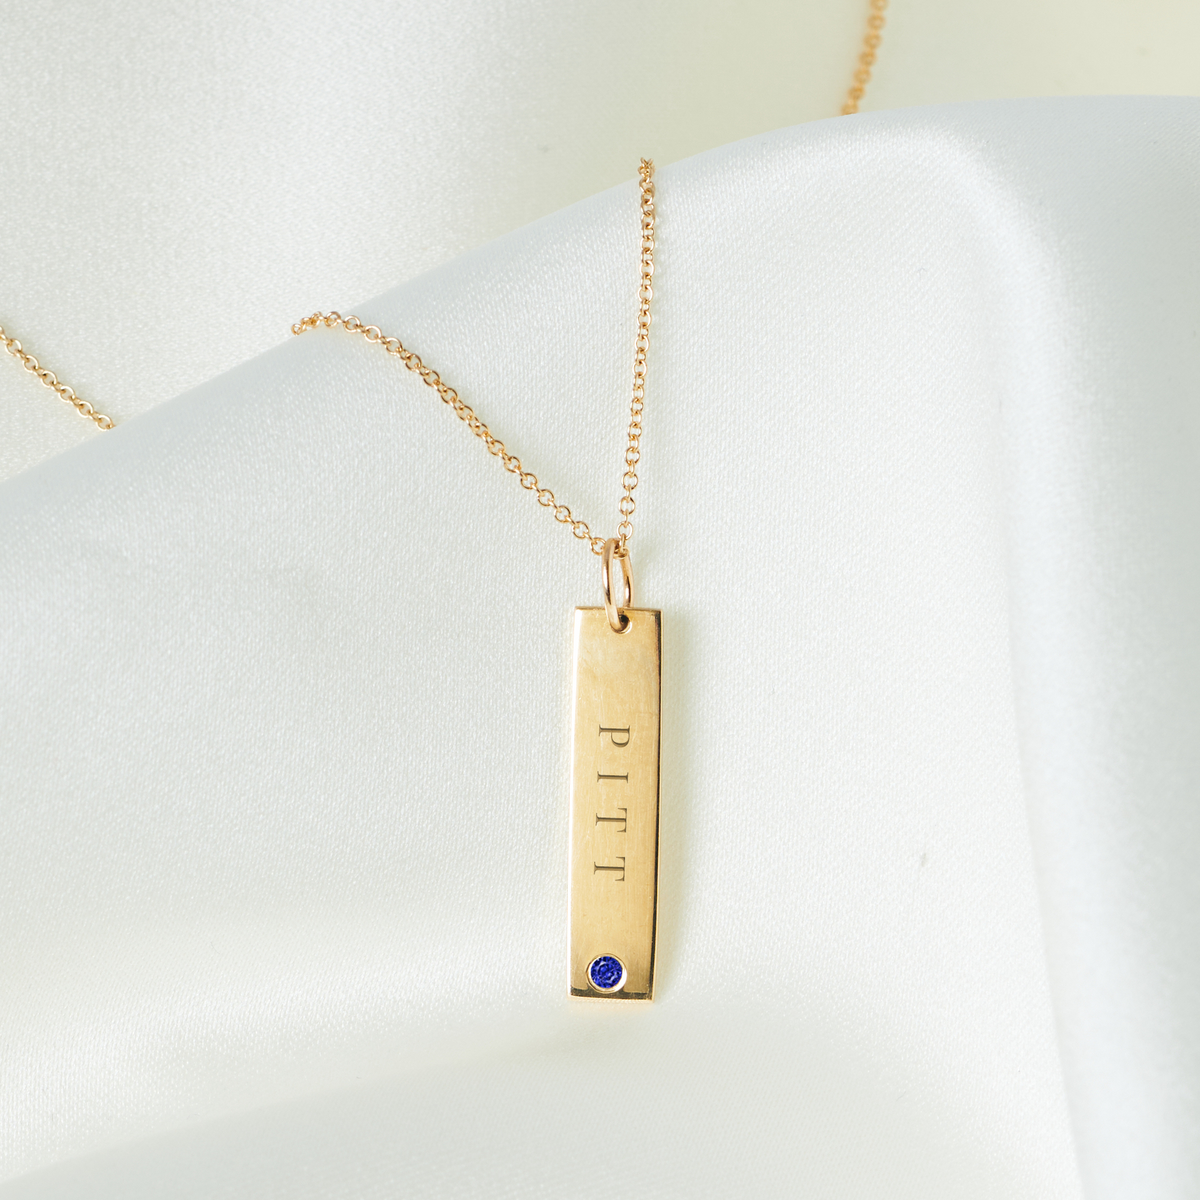 Pitt Sapphire Gemstone Bar laydown shown in gold on cable chain